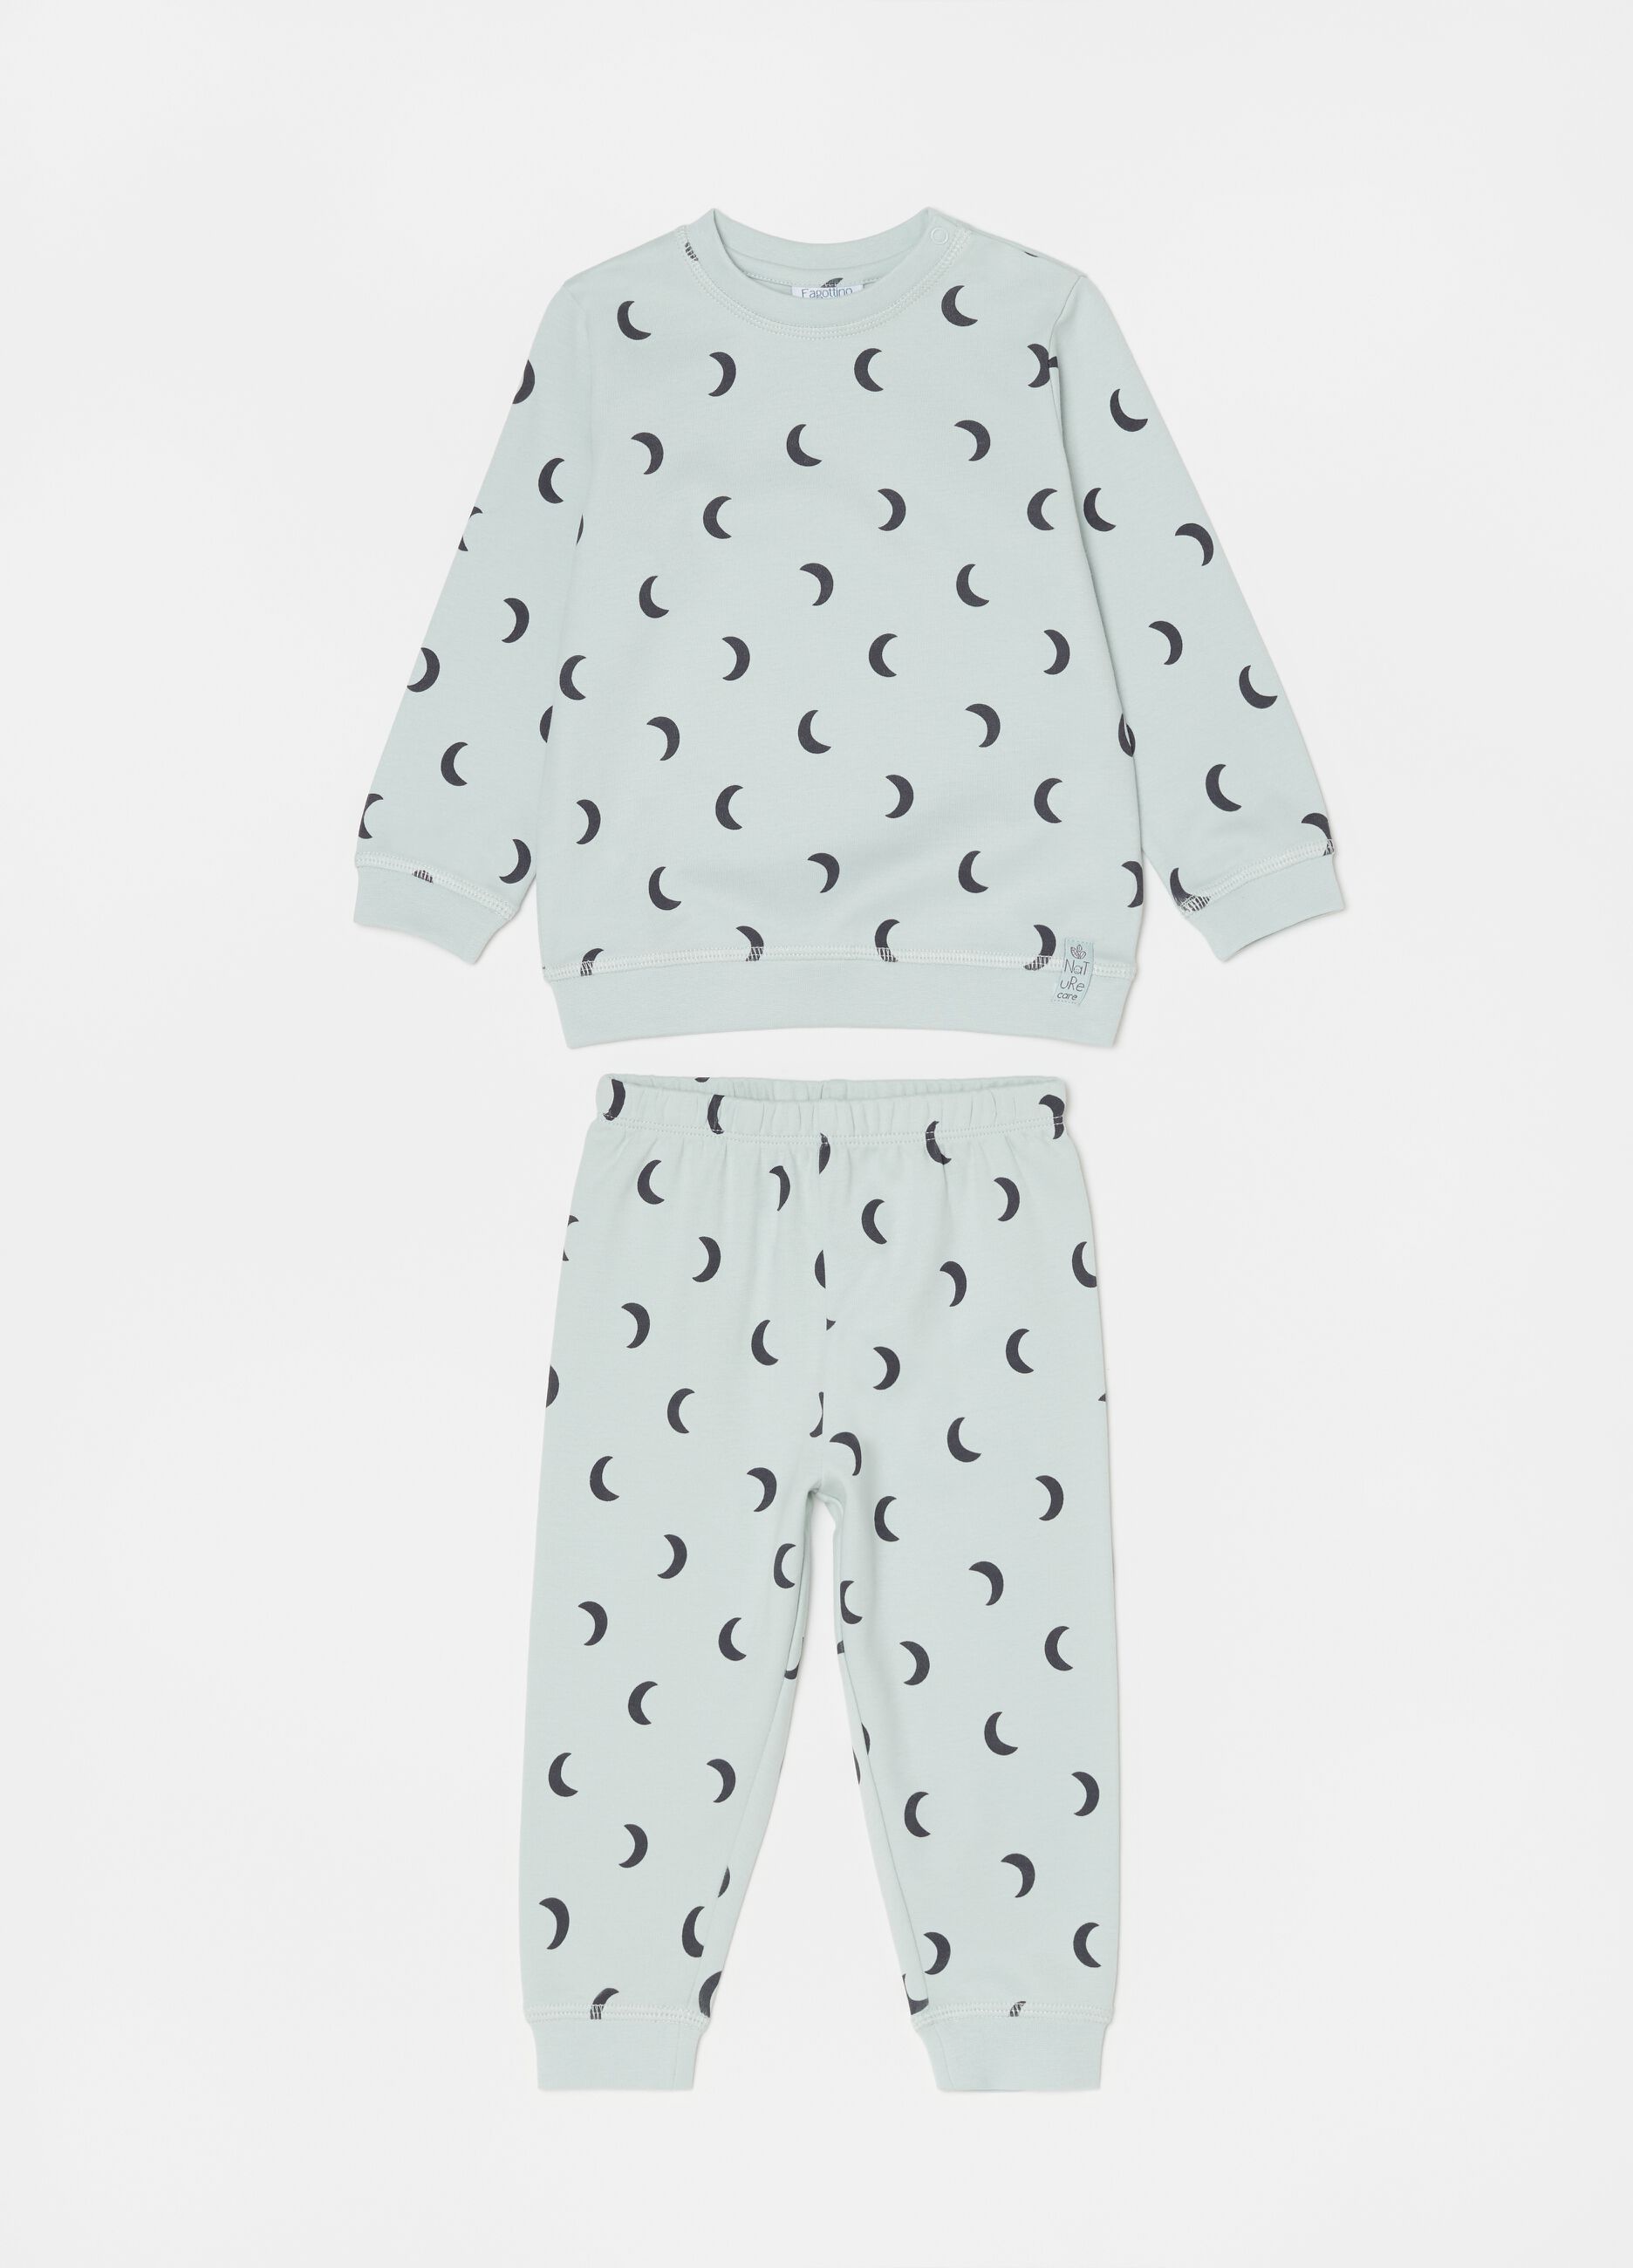 Long pyjamas in 100% cotton with moon pattern